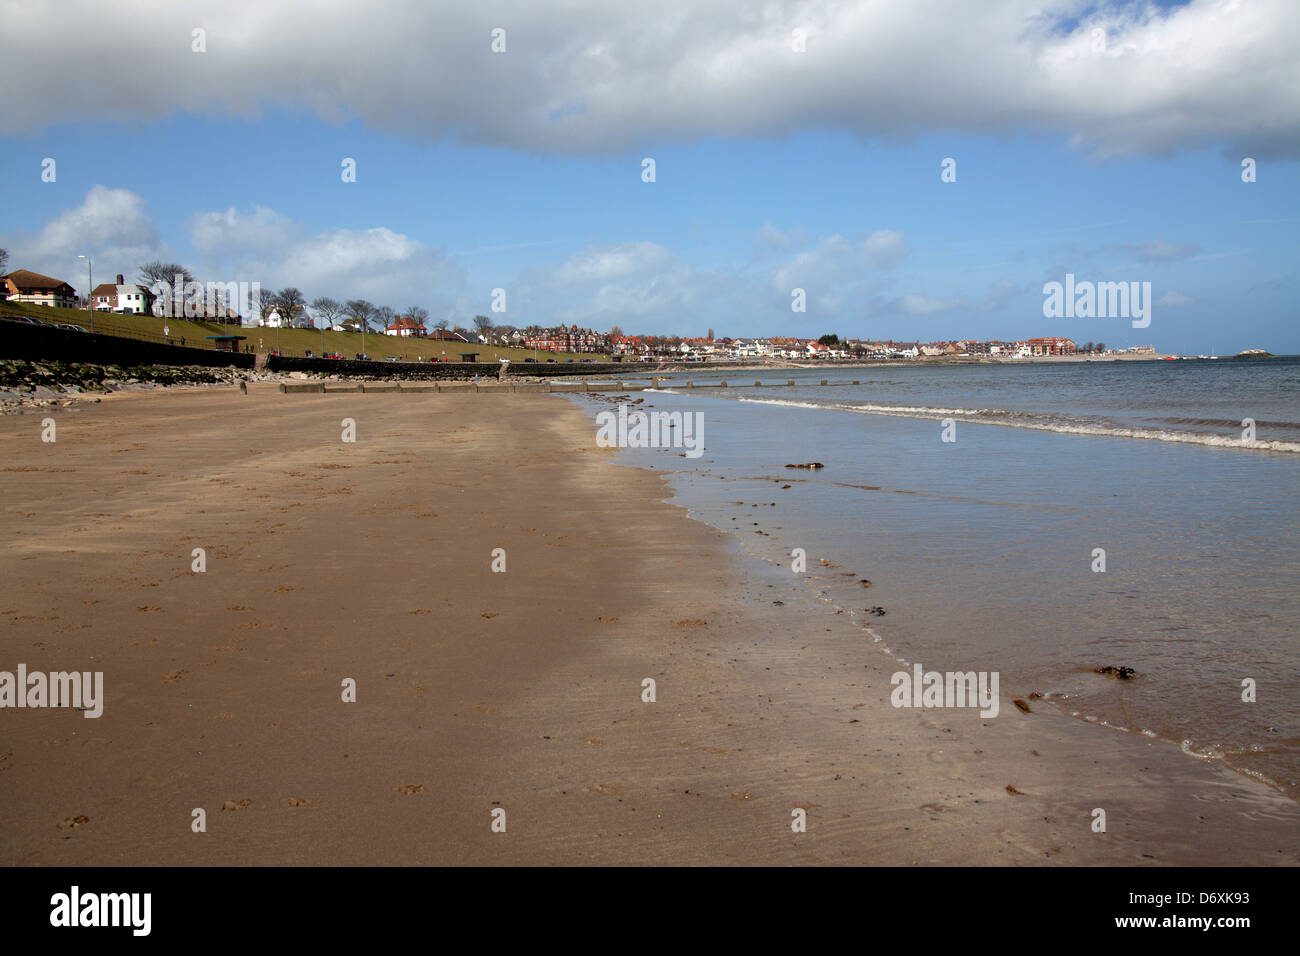 The Wales Coastal Path in North Wales. Picturesque view of Colwyn Bay and the Irish Sea, with Rhos on Sea in the background. Stock Photo